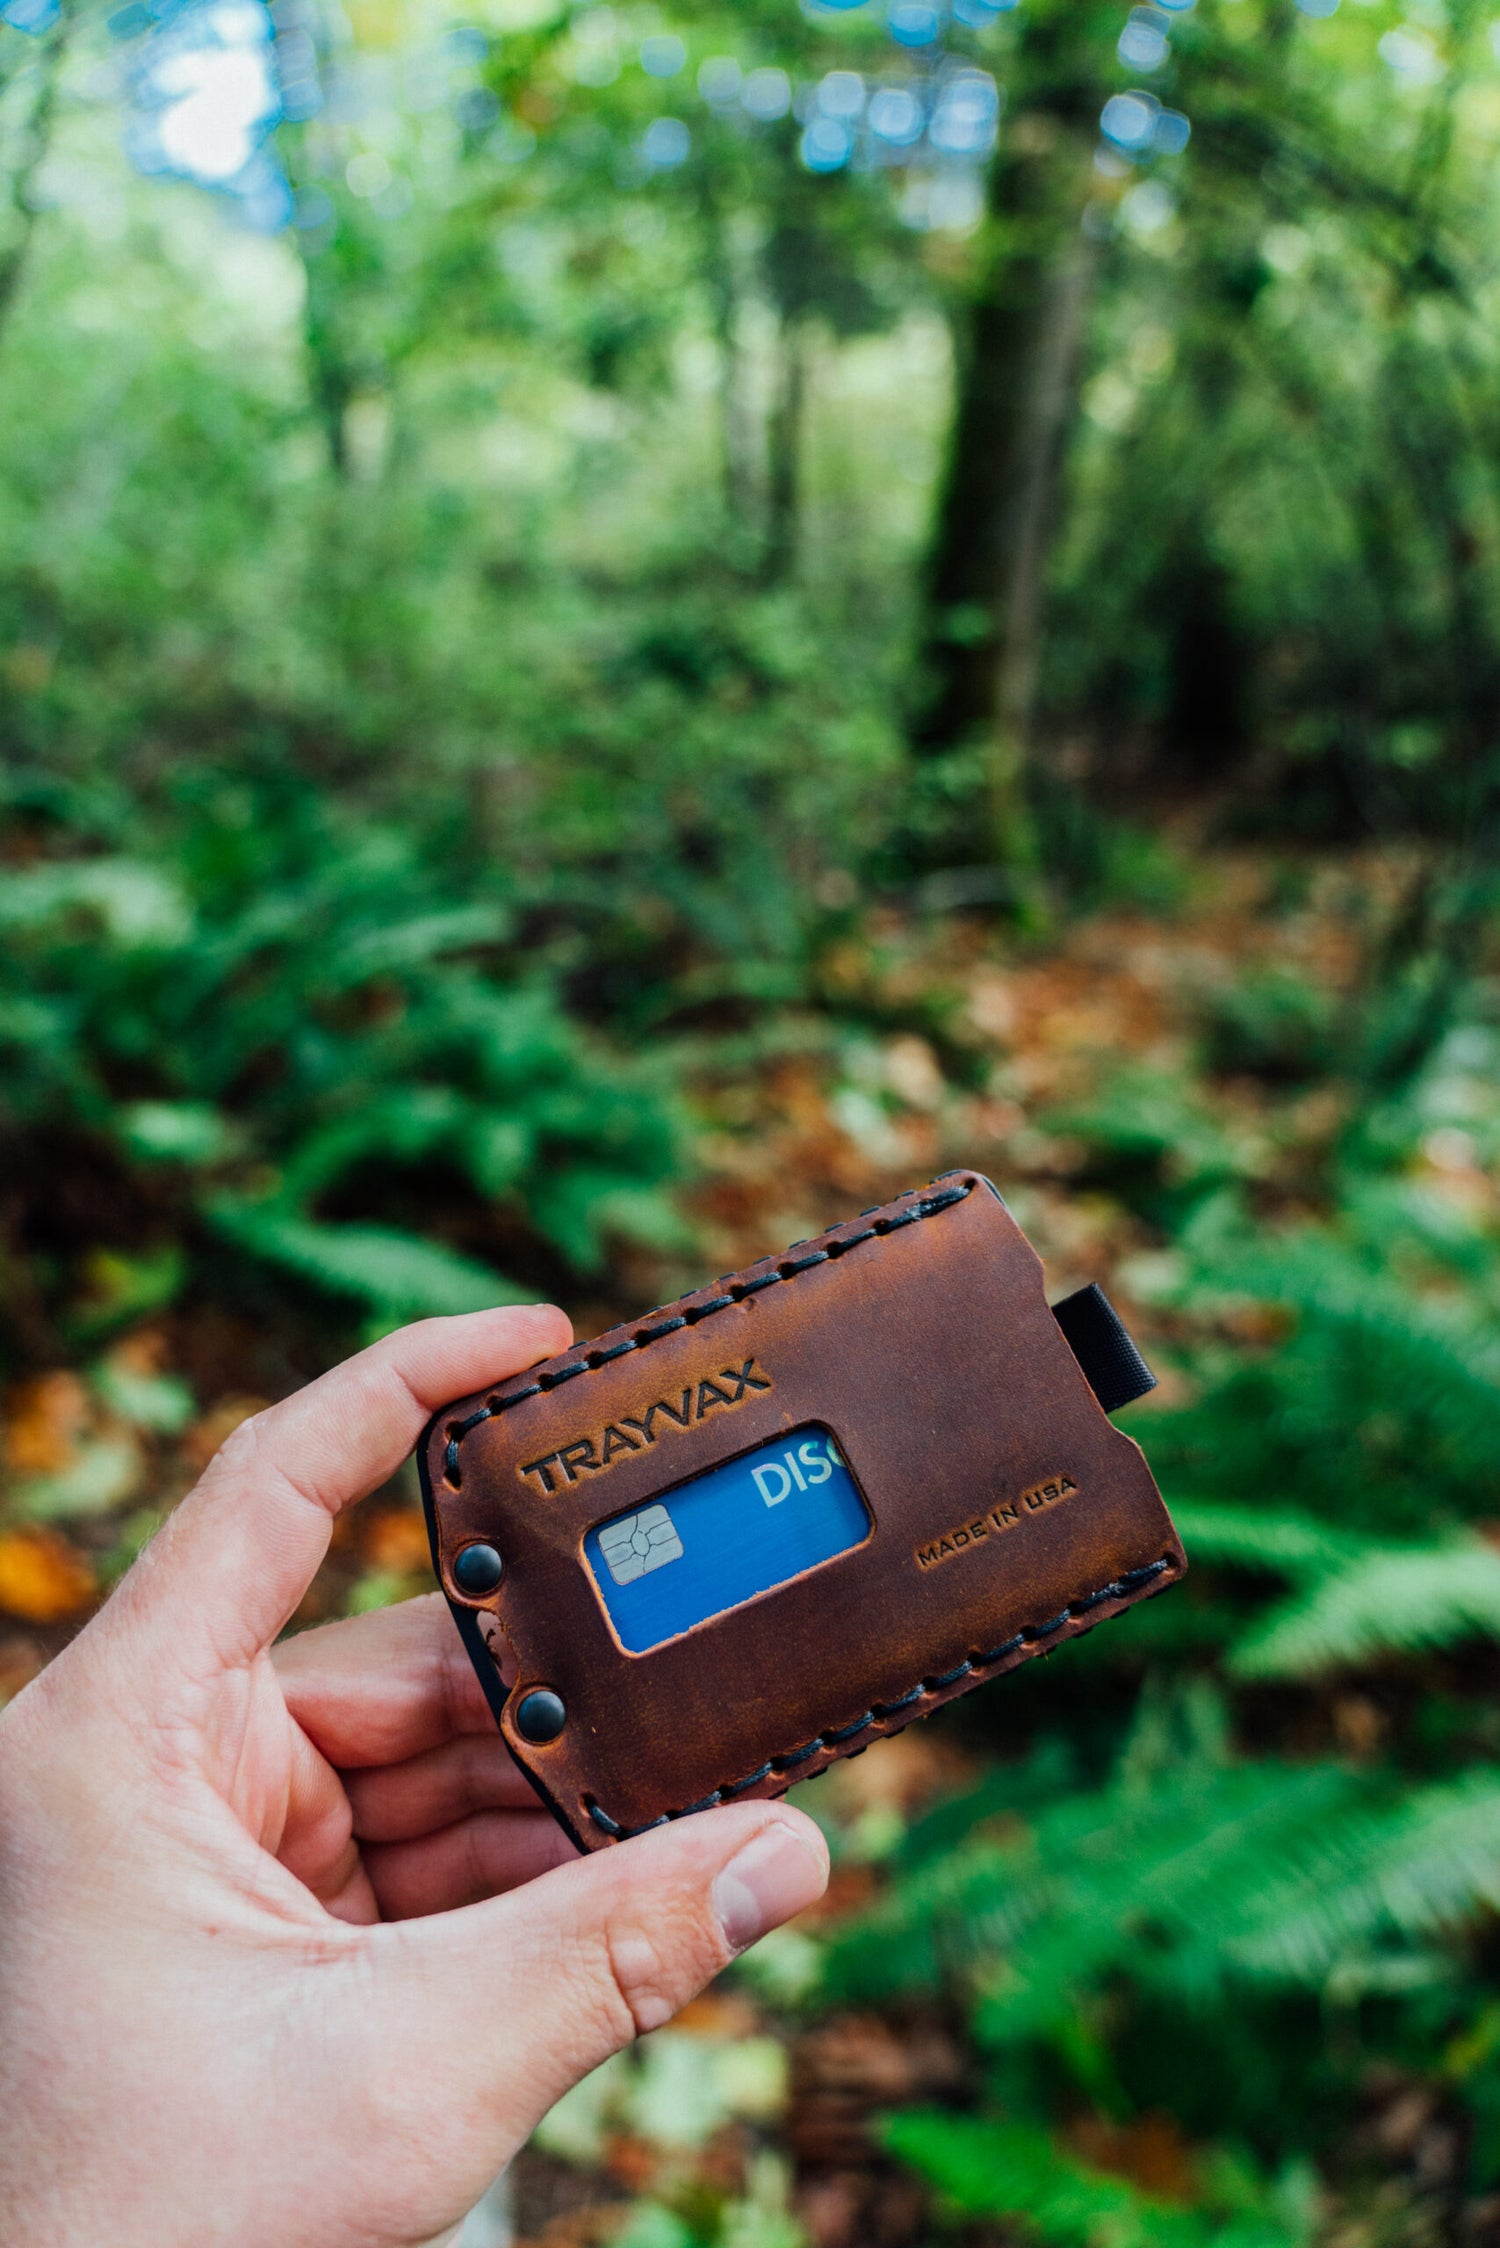 What are the uses of slim leather wallets?